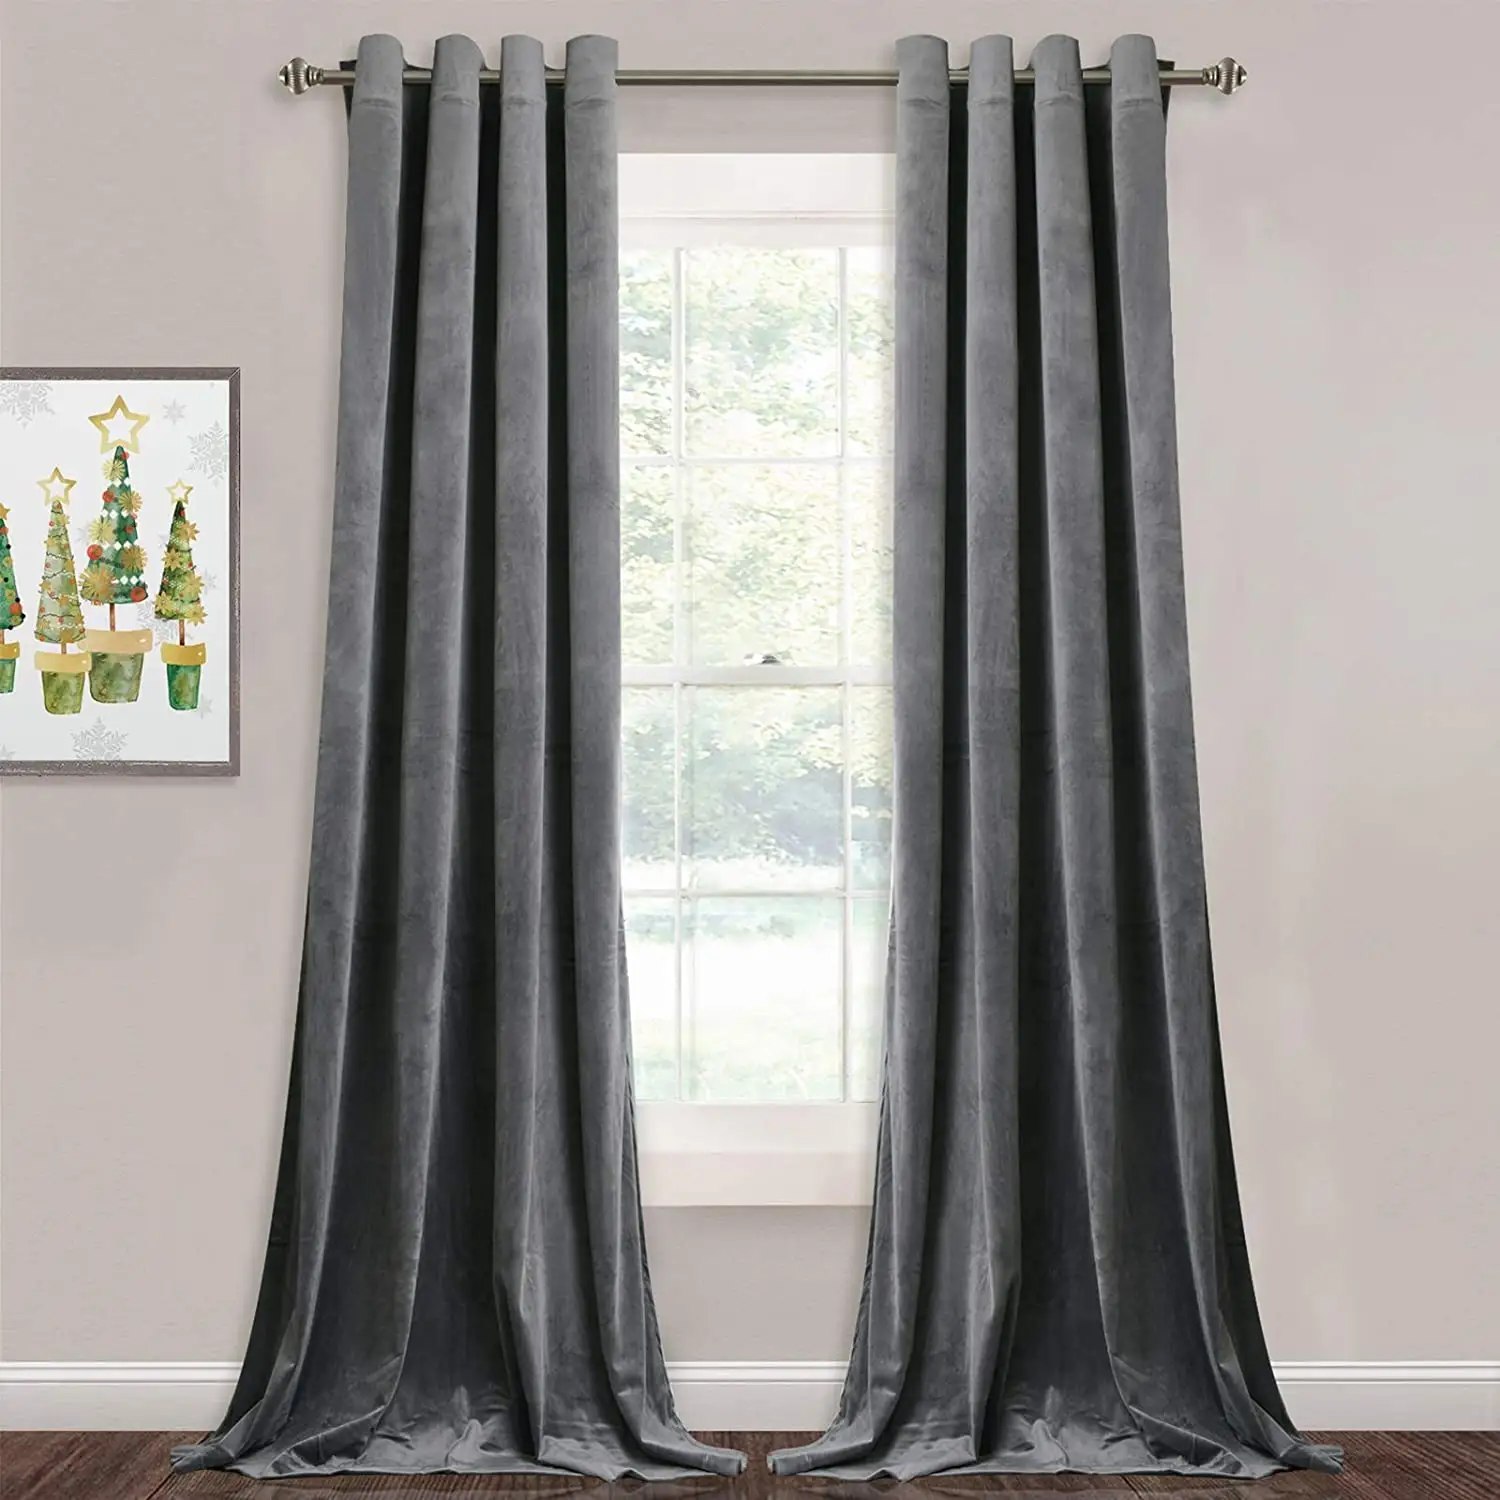 Velvet Curtains 2 Panels Blackout Curtains 84 Inches Long With Grommets For Windows Living Room Bedroom